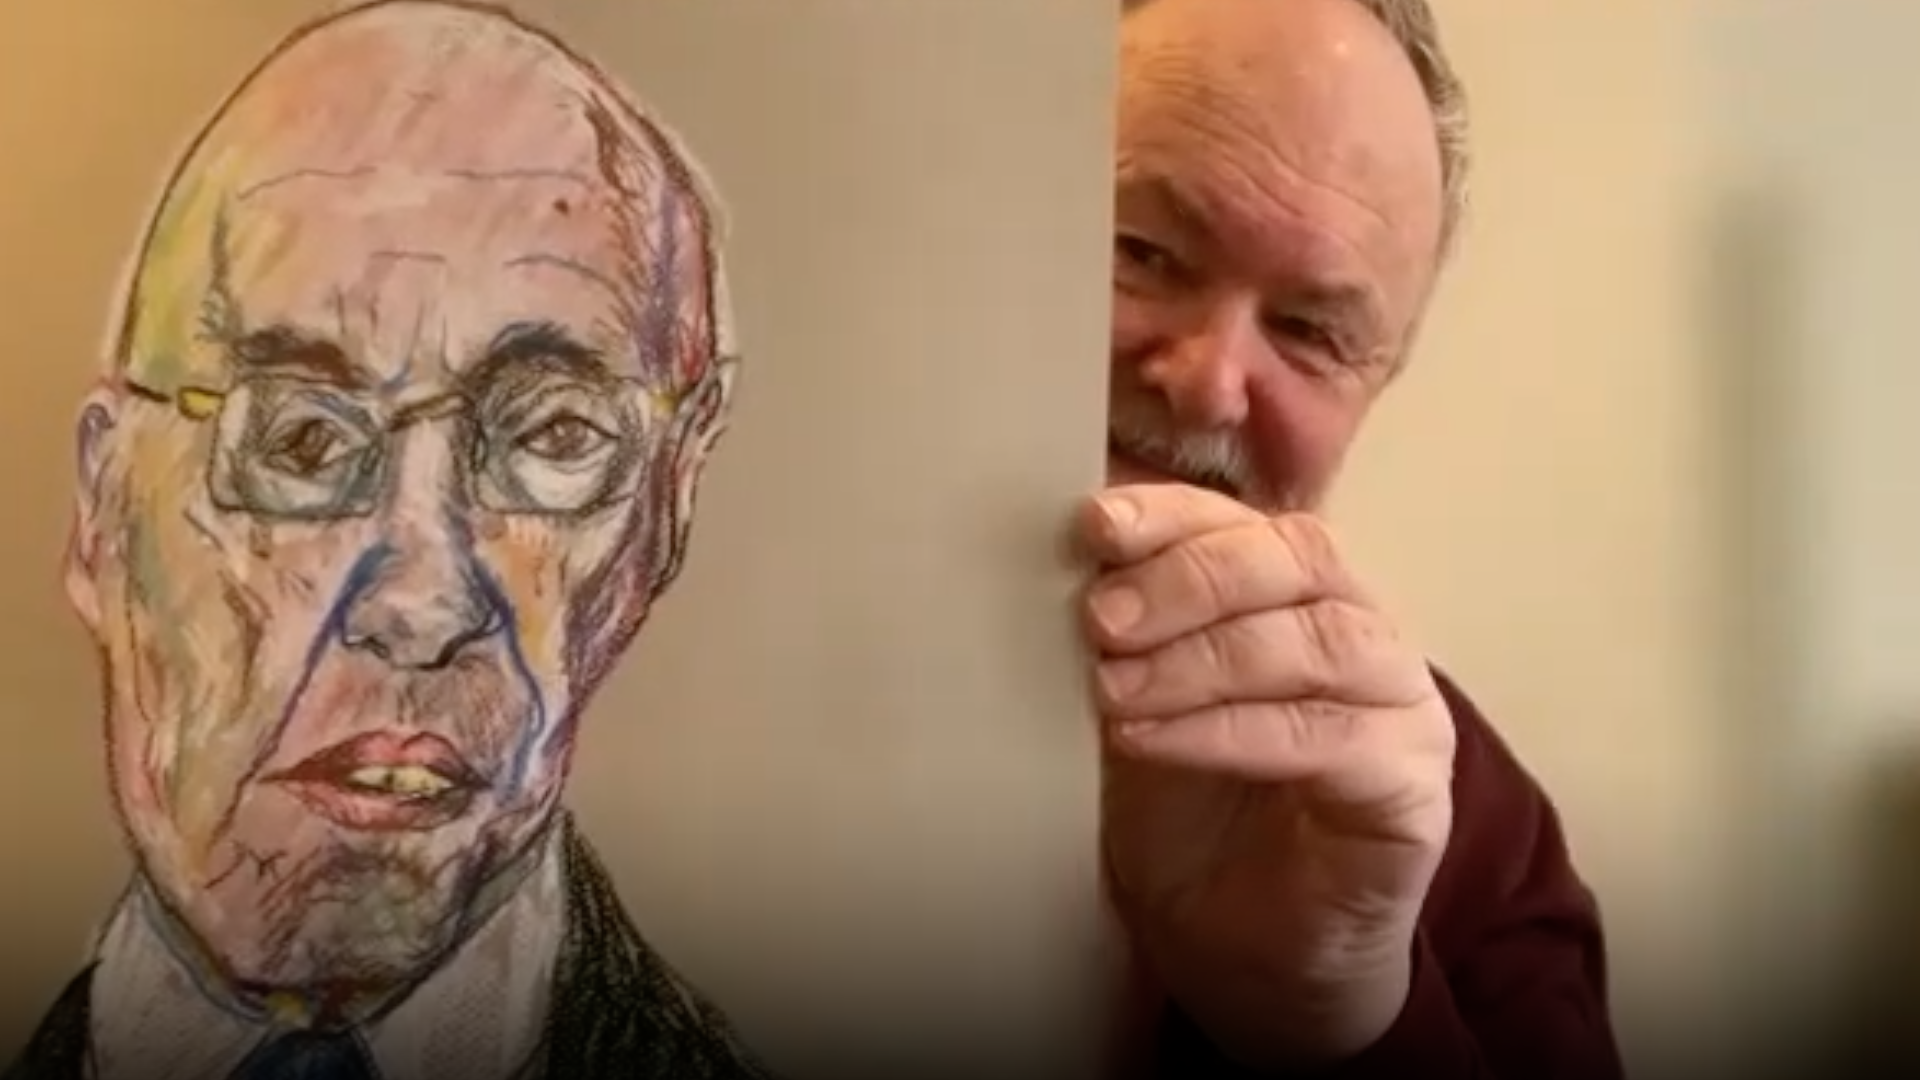 The Father - sketching with Willy